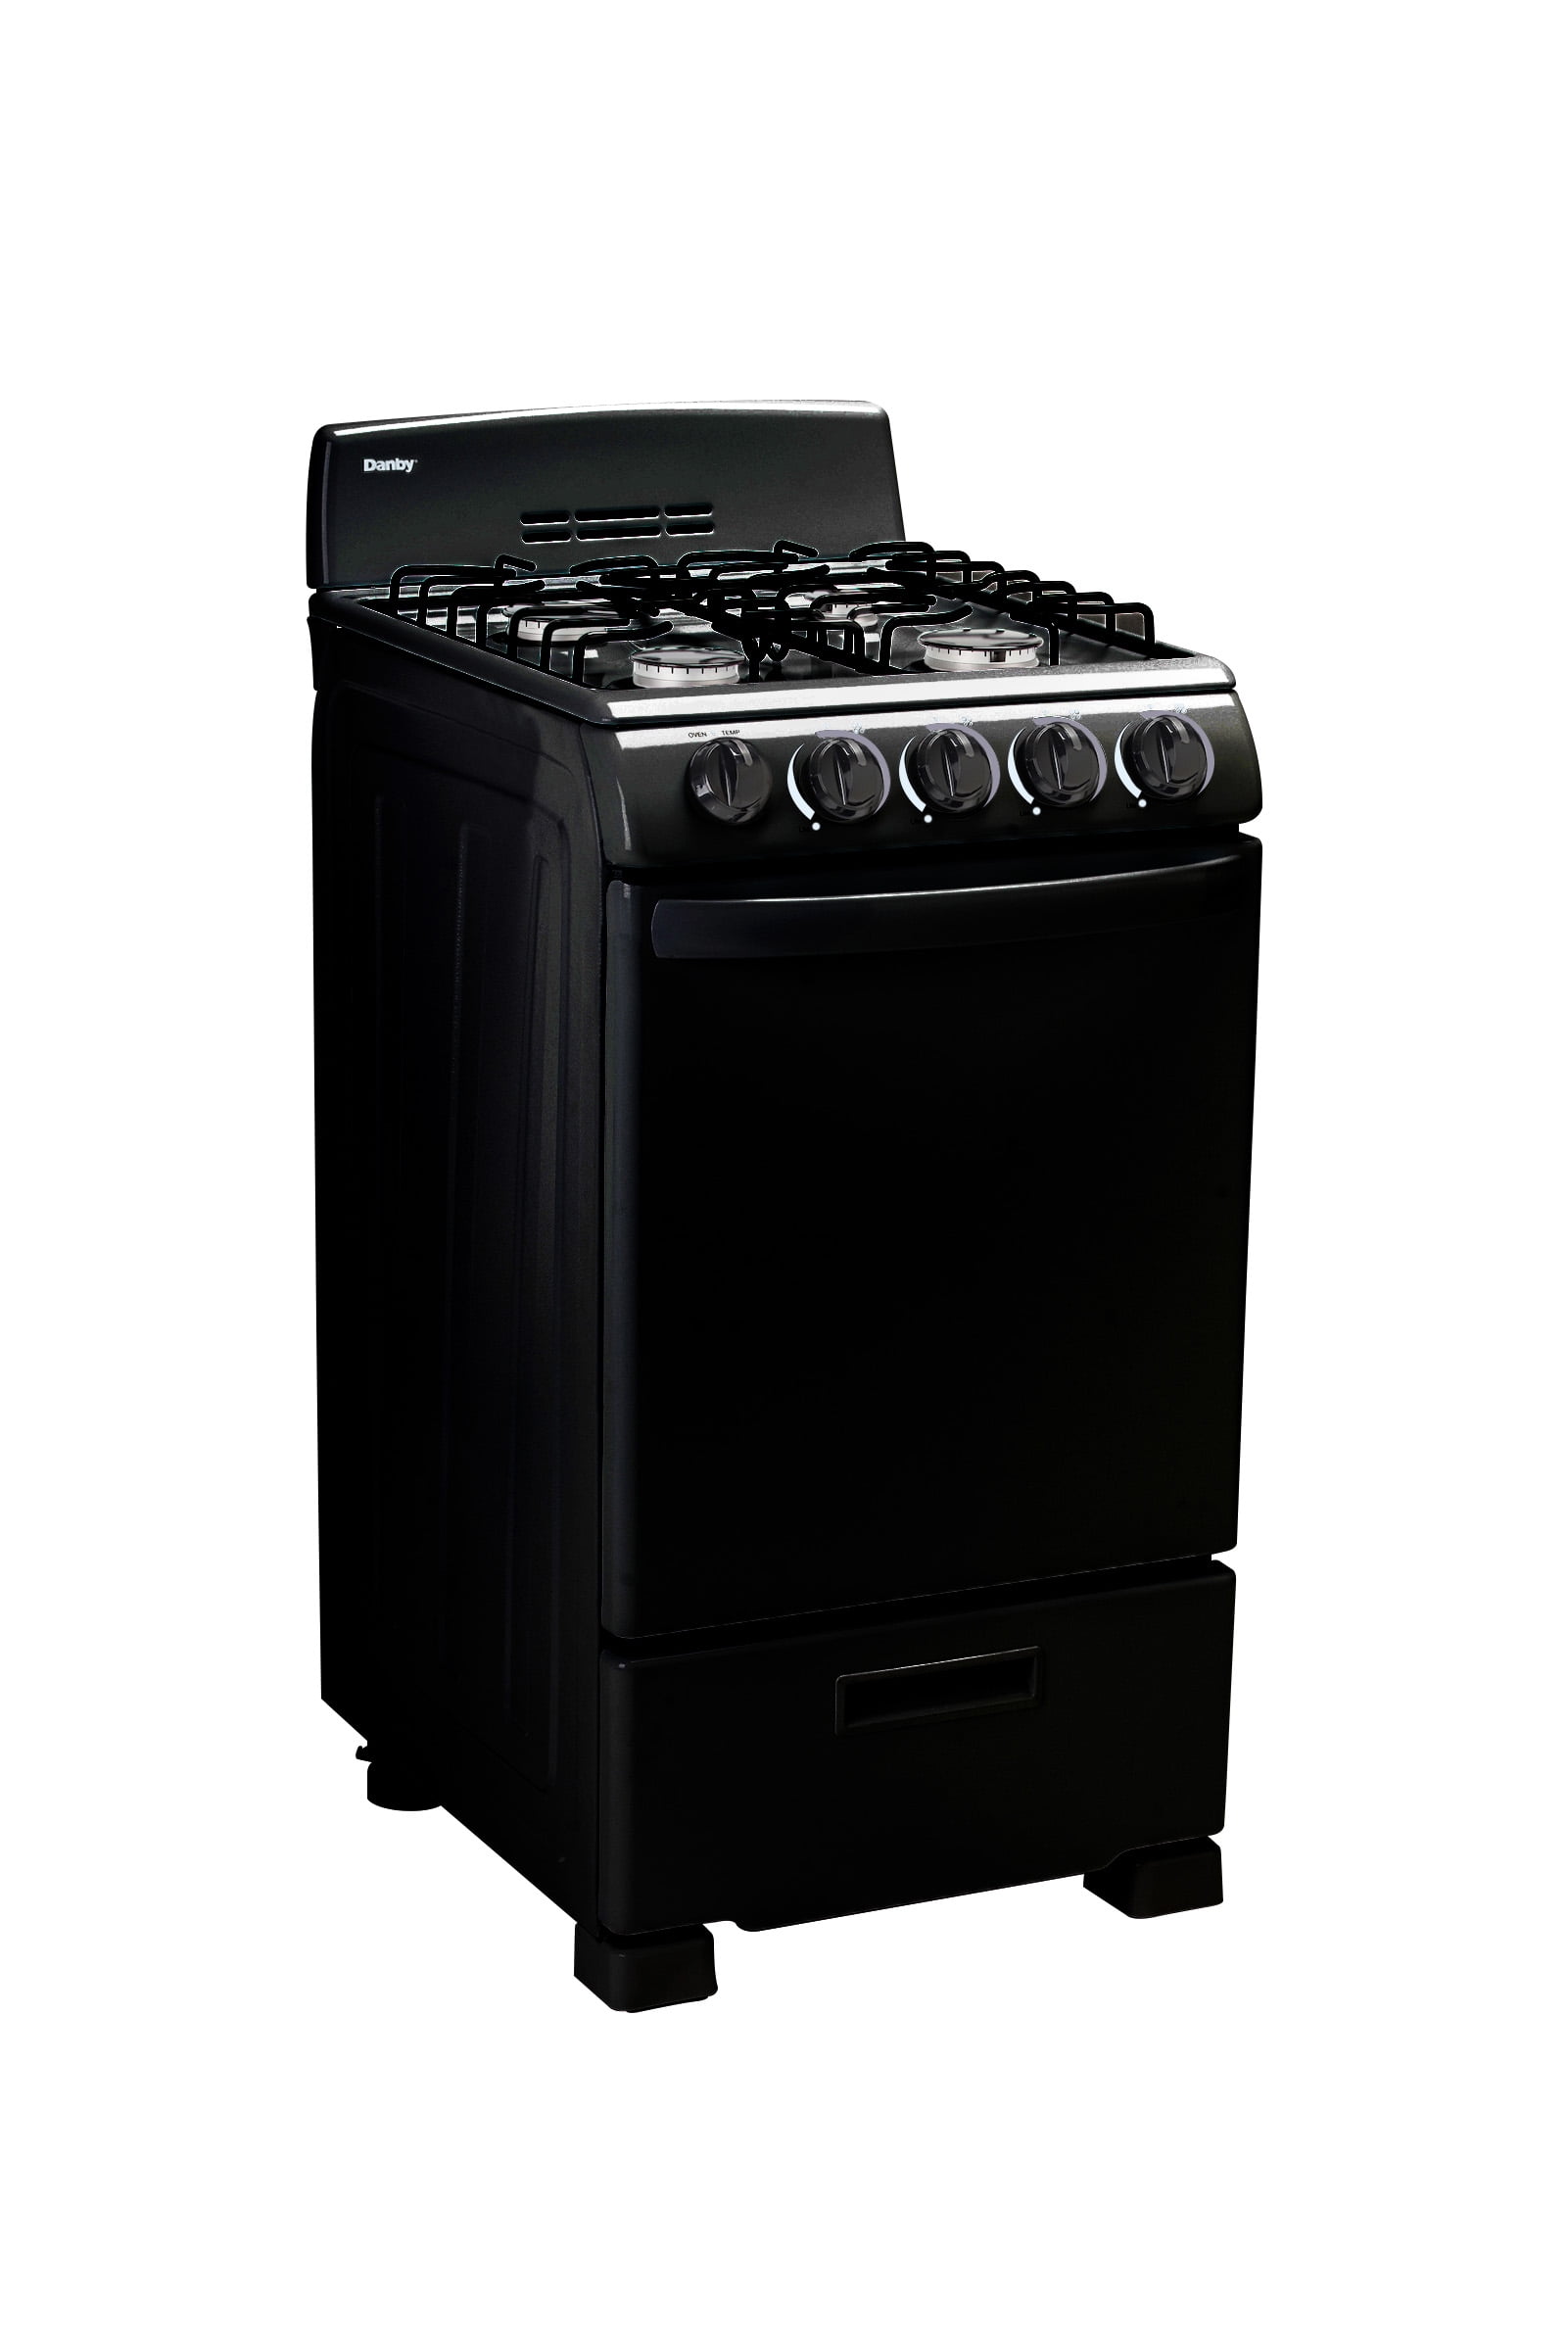 Picture of Danby DR202BGLP 20 in. Free Standing Gas Range